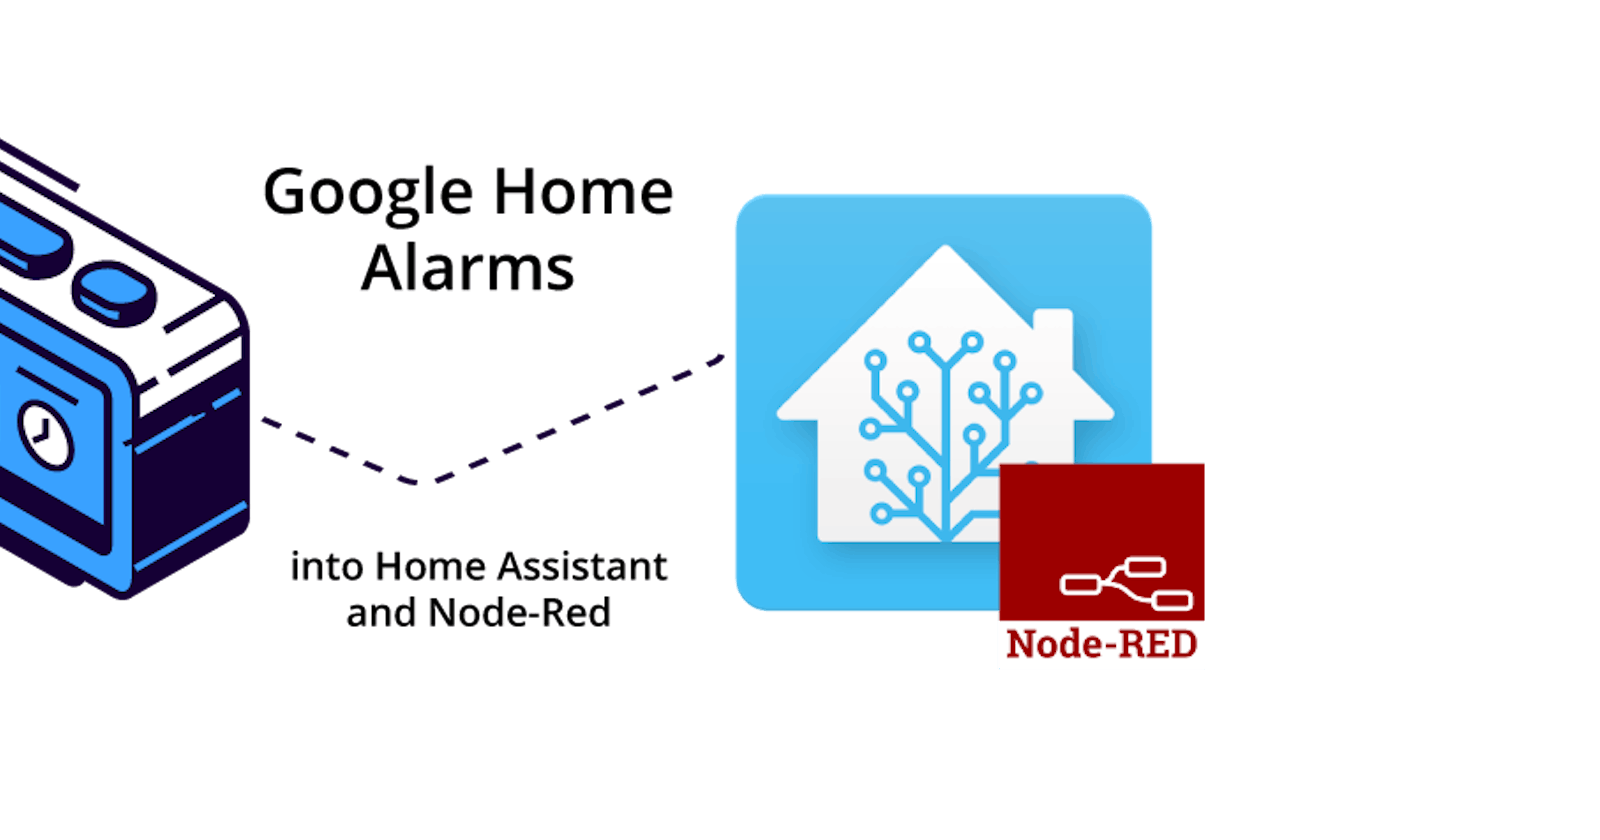 Feeding Google Home alarms into Home Assistant